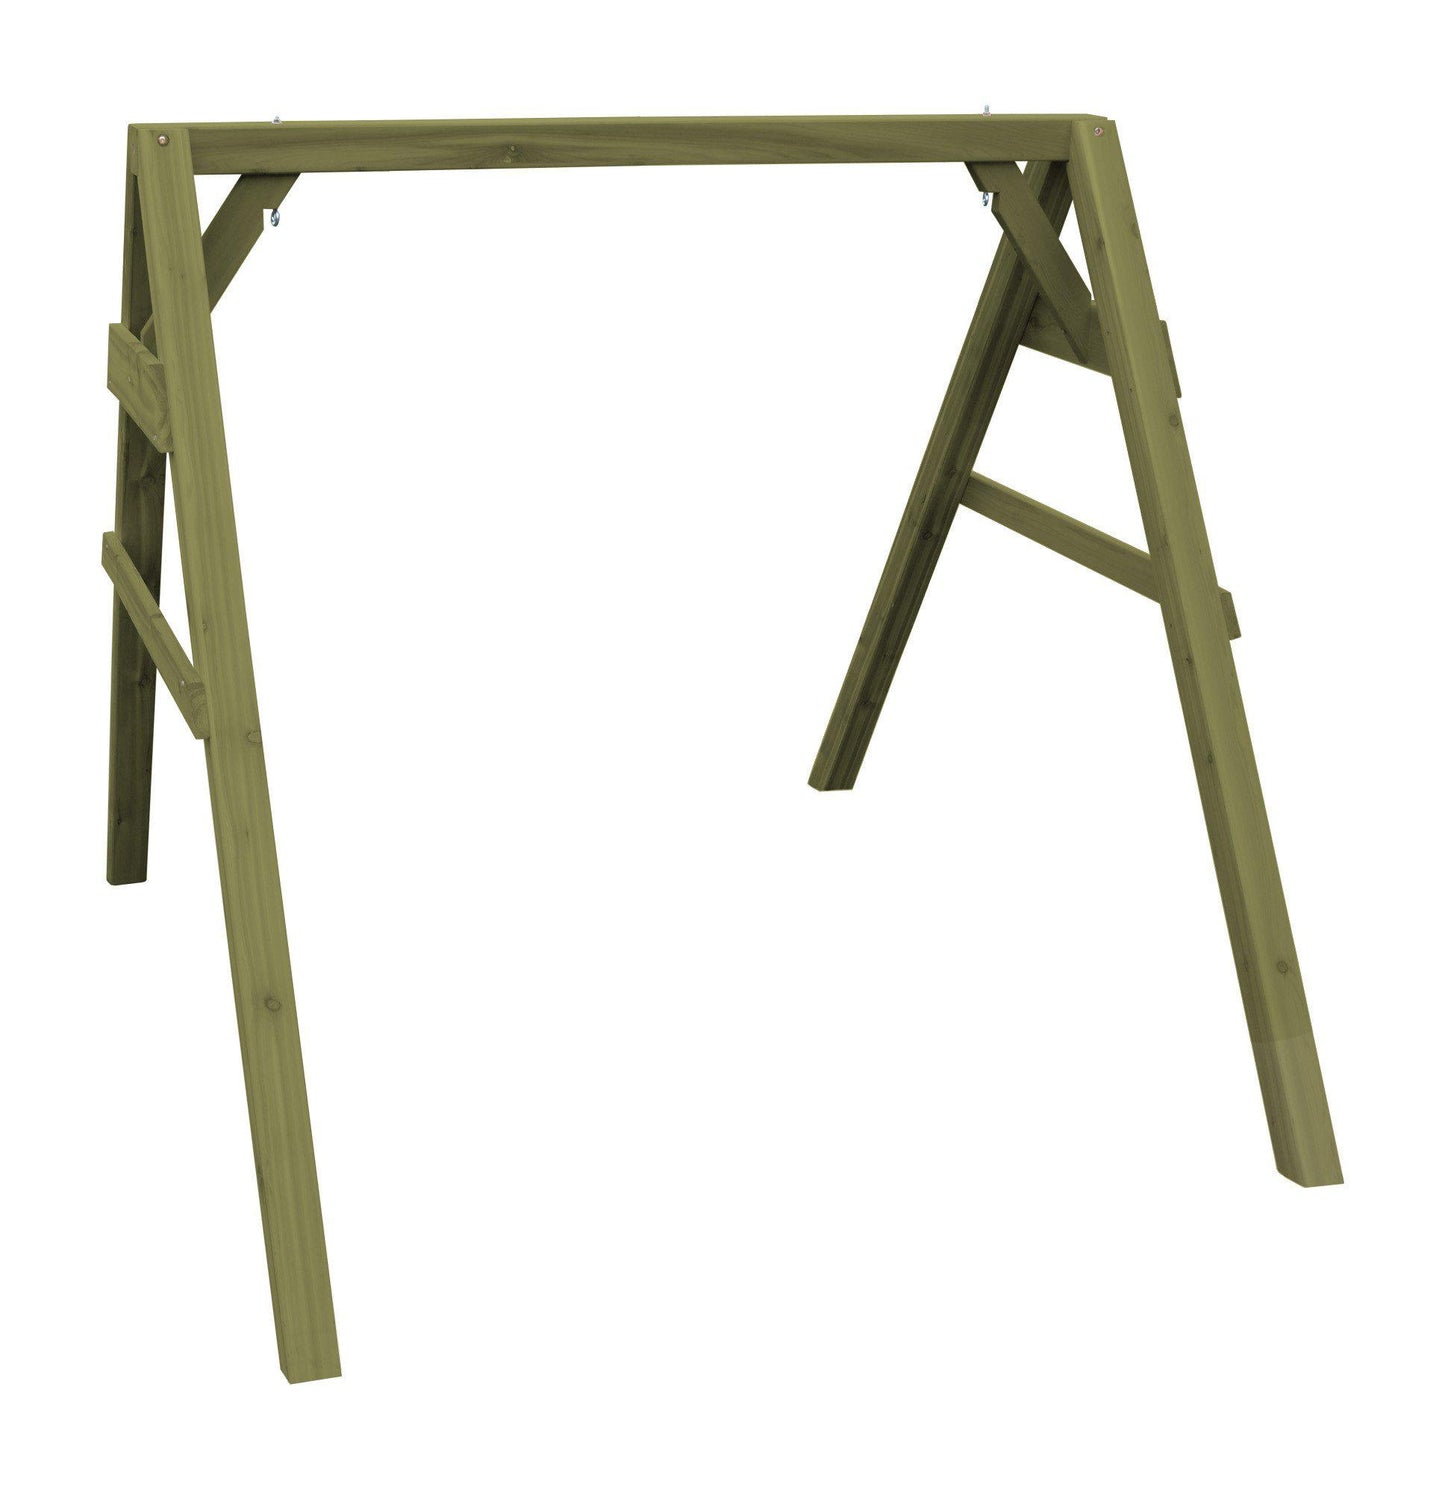 A&L Furniture Co. 4ft  4x4  A-Frame  Red Cedar Swing Stand for Swing or Swingbed Heavy Duty 900 lbs Max Weight Capacity (Hangers Included) - LEAD TIME TO SHIP 2 WEEKS